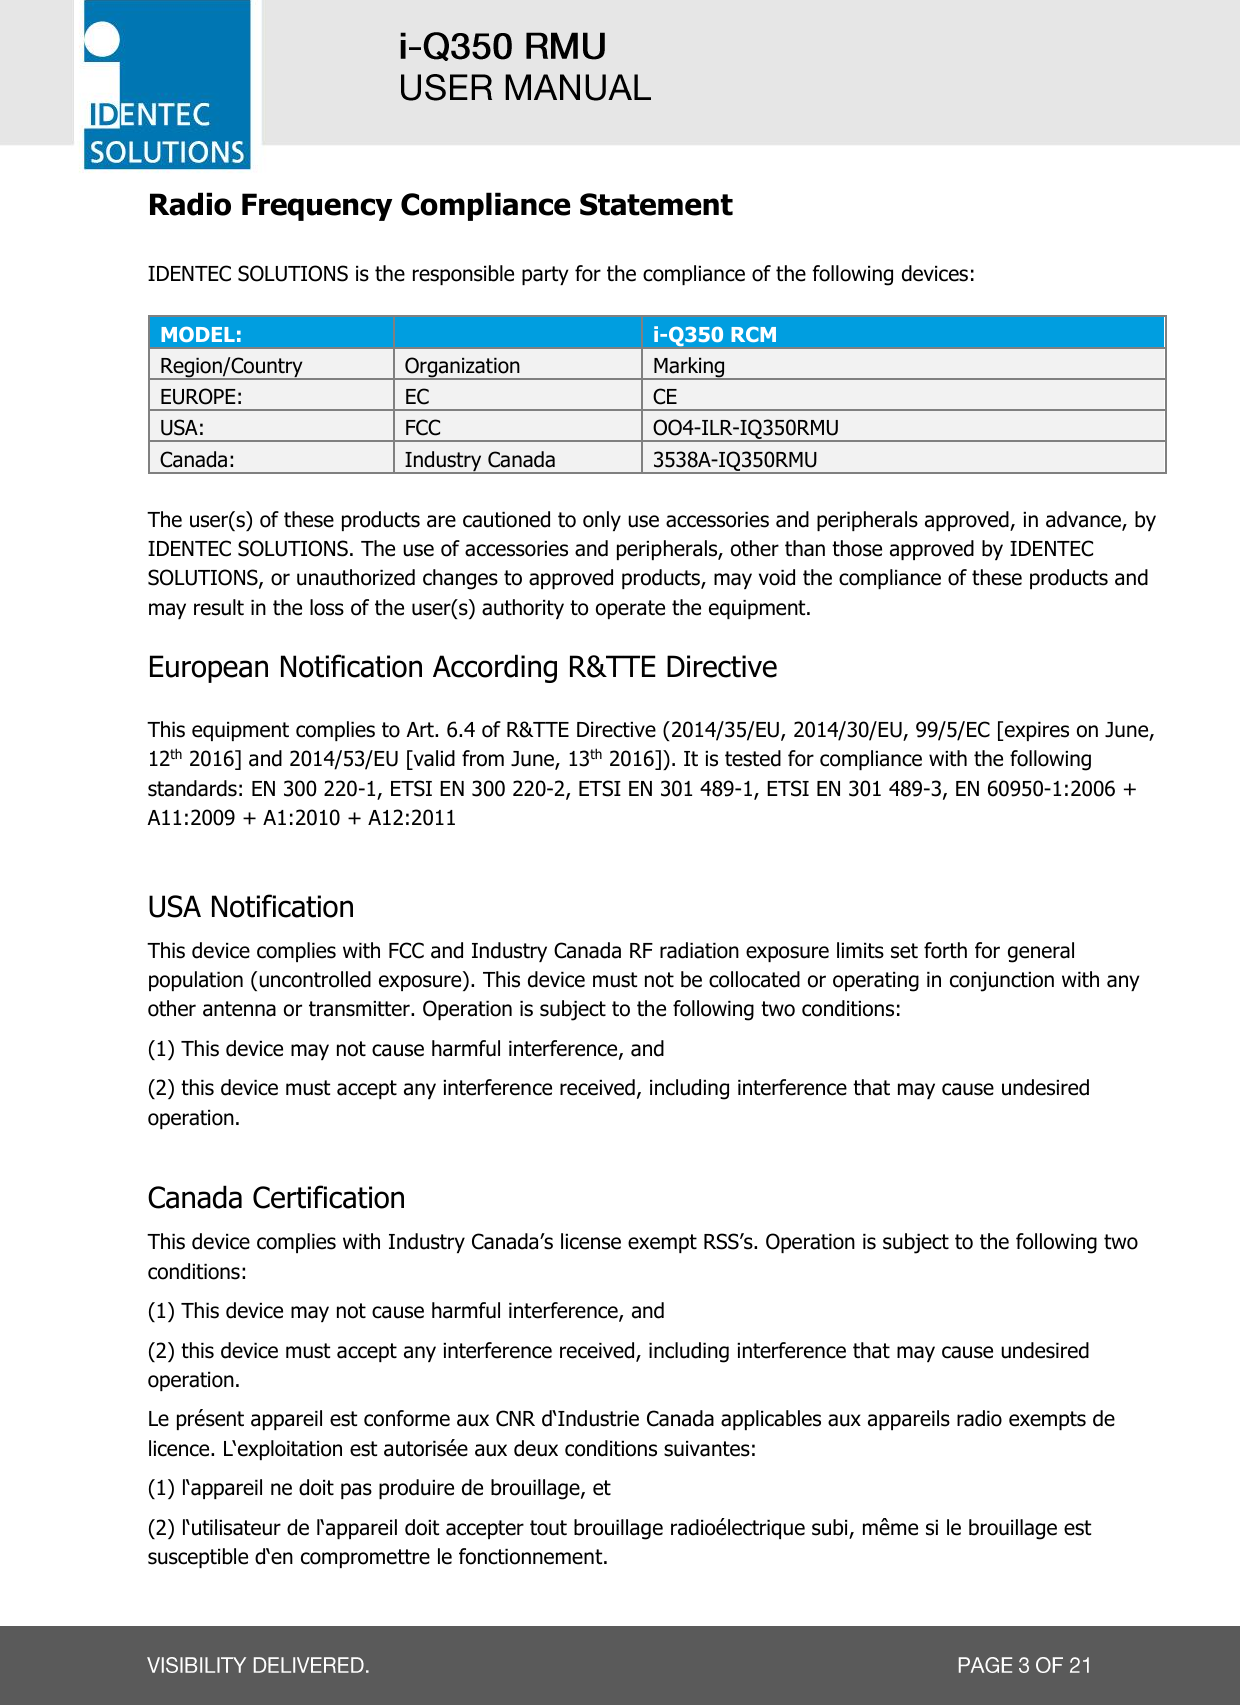   Radio Frequency Compliance Statement  IDENTEC SOLUTIONS is the responsible party for the compliance of the following devices:  MODEL:  i-Q350 RCM Region/Country Organization Marking EUROPE: EC CE USA: FCC OO4-ILR-IQ350RMU Canada: Industry Canada 3538A-IQ350RMU  The user(s) of these products are cautioned to only use accessories and peripherals approved, in advance, by IDENTEC SOLUTIONS. The use of accessories and peripherals, other than those approved by IDENTEC SOLUTIONS, or unauthorized changes to approved products, may void the compliance of these products and may result in the loss of the user(s) authority to operate the equipment.  European Notification According R&amp;TTE Directive  This equipment complies to Art. 6.4 of R&amp;TTE Directive (2014/35/EU, 2014/30/EU, 99/5/EC [expires on June, 12th 2016] and 2014/53/EU [valid from June, 13th 2016]). It is tested for compliance with the following standards: EN 300 220-1, ETSI EN 300 220-2, ETSI EN 301 489-1, ETSI EN 301 489-3, EN 60950-1:2006 + A11:2009 + A1:2010 + A12:2011   USA Notification This device complies with FCC and Industry Canada RF radiation exposure limits set forth for general population (uncontrolled exposure). This device must not be collocated or operating in conjunction with any other antenna or transmitter. Operation is subject to the following two conditions:  (1) This device may not cause harmful interference, and  (2) this device must accept any interference received, including interference that may cause undesired operation.  Canada Certification This device complies with Industry Canada’s license exempt RSS’s. Operation is subject to the following two conditions:  (1) This device may not cause harmful interference, and  (2) this device must accept any interference received, including interference that may cause undesired operation. Le présent appareil est conforme aux CNR d‘Industrie Canada applicables aux appareils radio exempts de licence. L‘exploitation est autorisée aux deux conditions suivantes: (1) l‘appareil ne doit pas produire de brouillage, et (2) l‘utilisateur de l‘appareil doit accepter tout brouillage radioélectrique subi, même si le brouillage est susceptible d‘en compromettre le fonctionnement. 